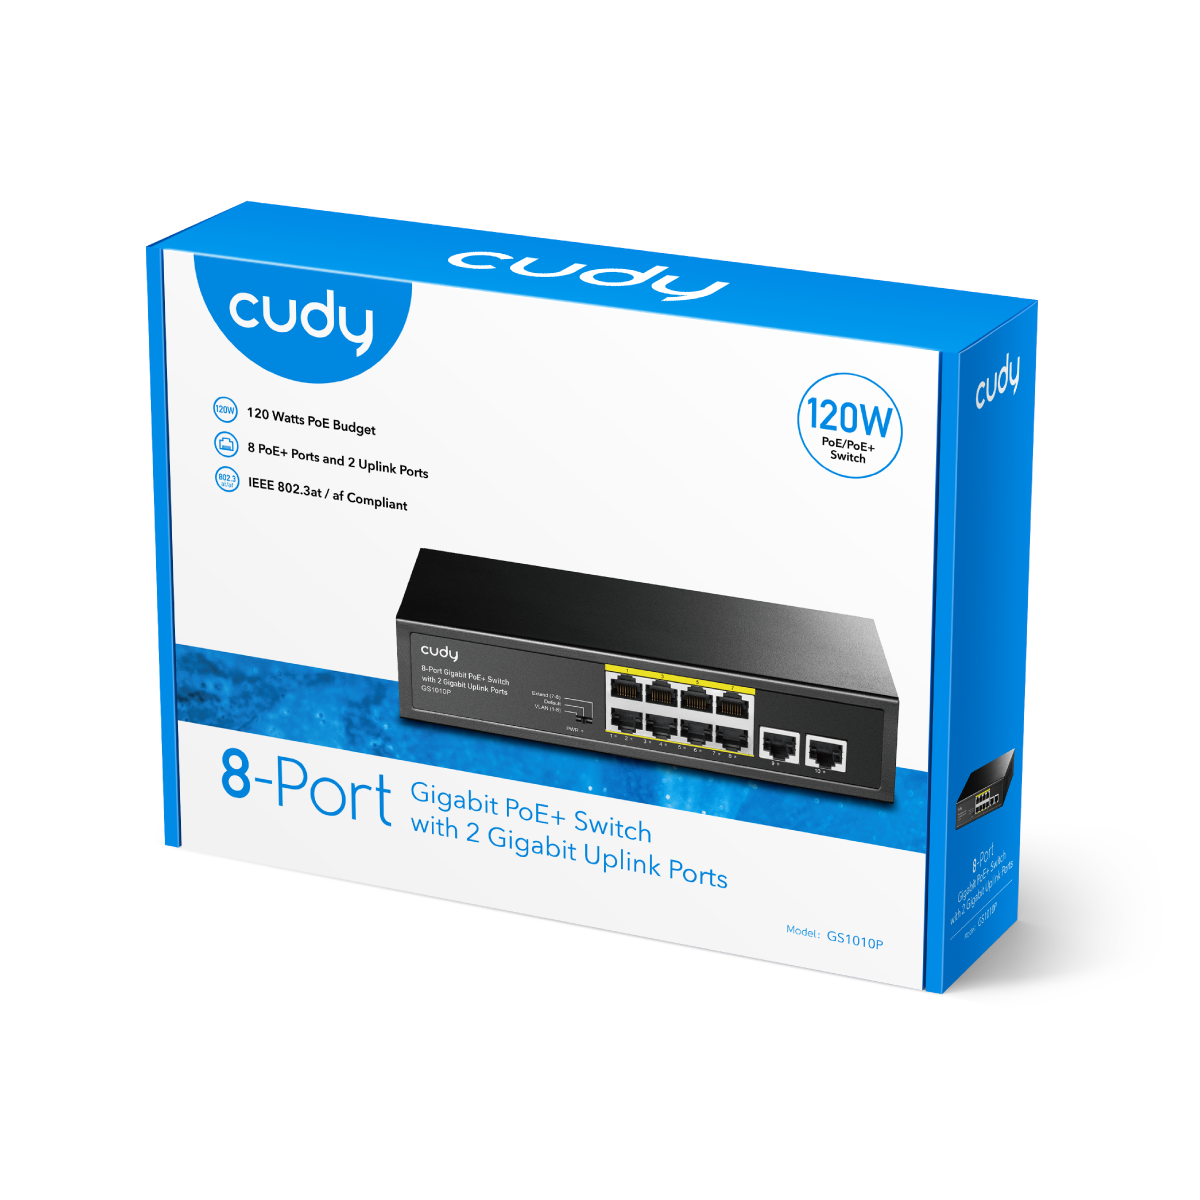 8-Port Gigabit PoE+ Switch with 2 Gigabit Uplink Ports 120W, Model:  GS1010P-Cudy: WiFi, 4G, and 5G Equipments and Solutions